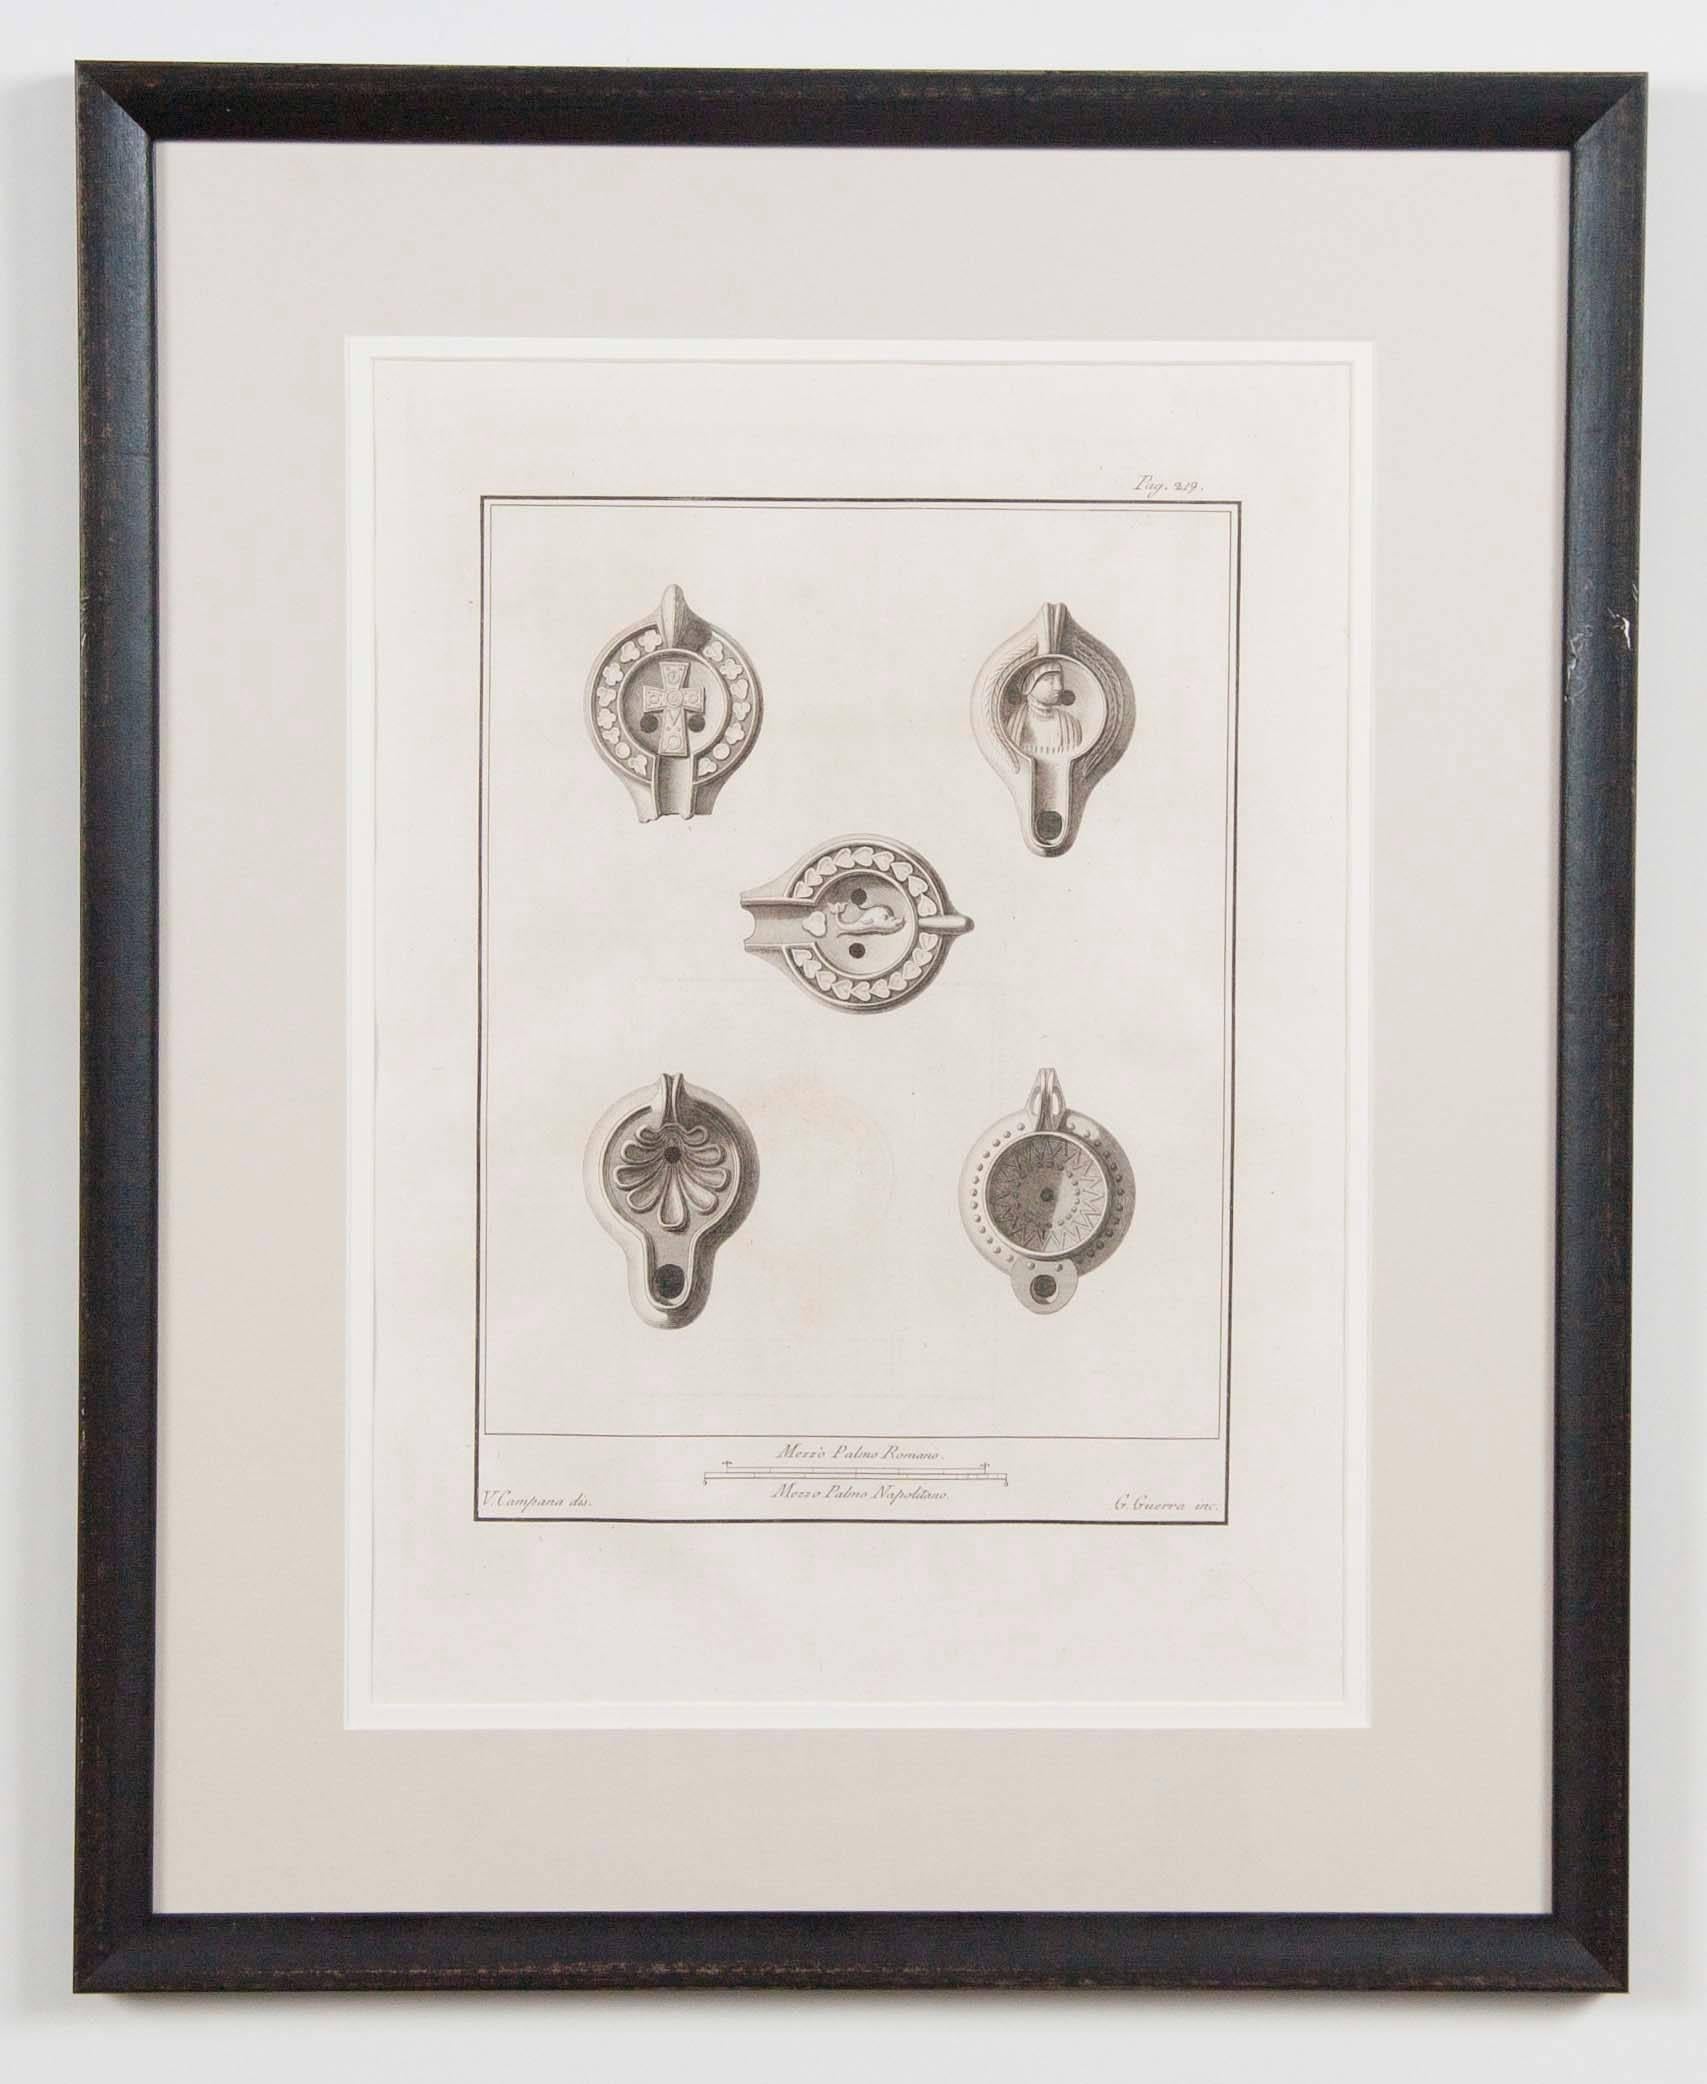 A set of 12 framed copper etched plates depicting various ancient oil lamps excavated from Herculaneum in the 18th century. These high quality etching show in exquisite detail the great quality and variety of the oil lamps from the first